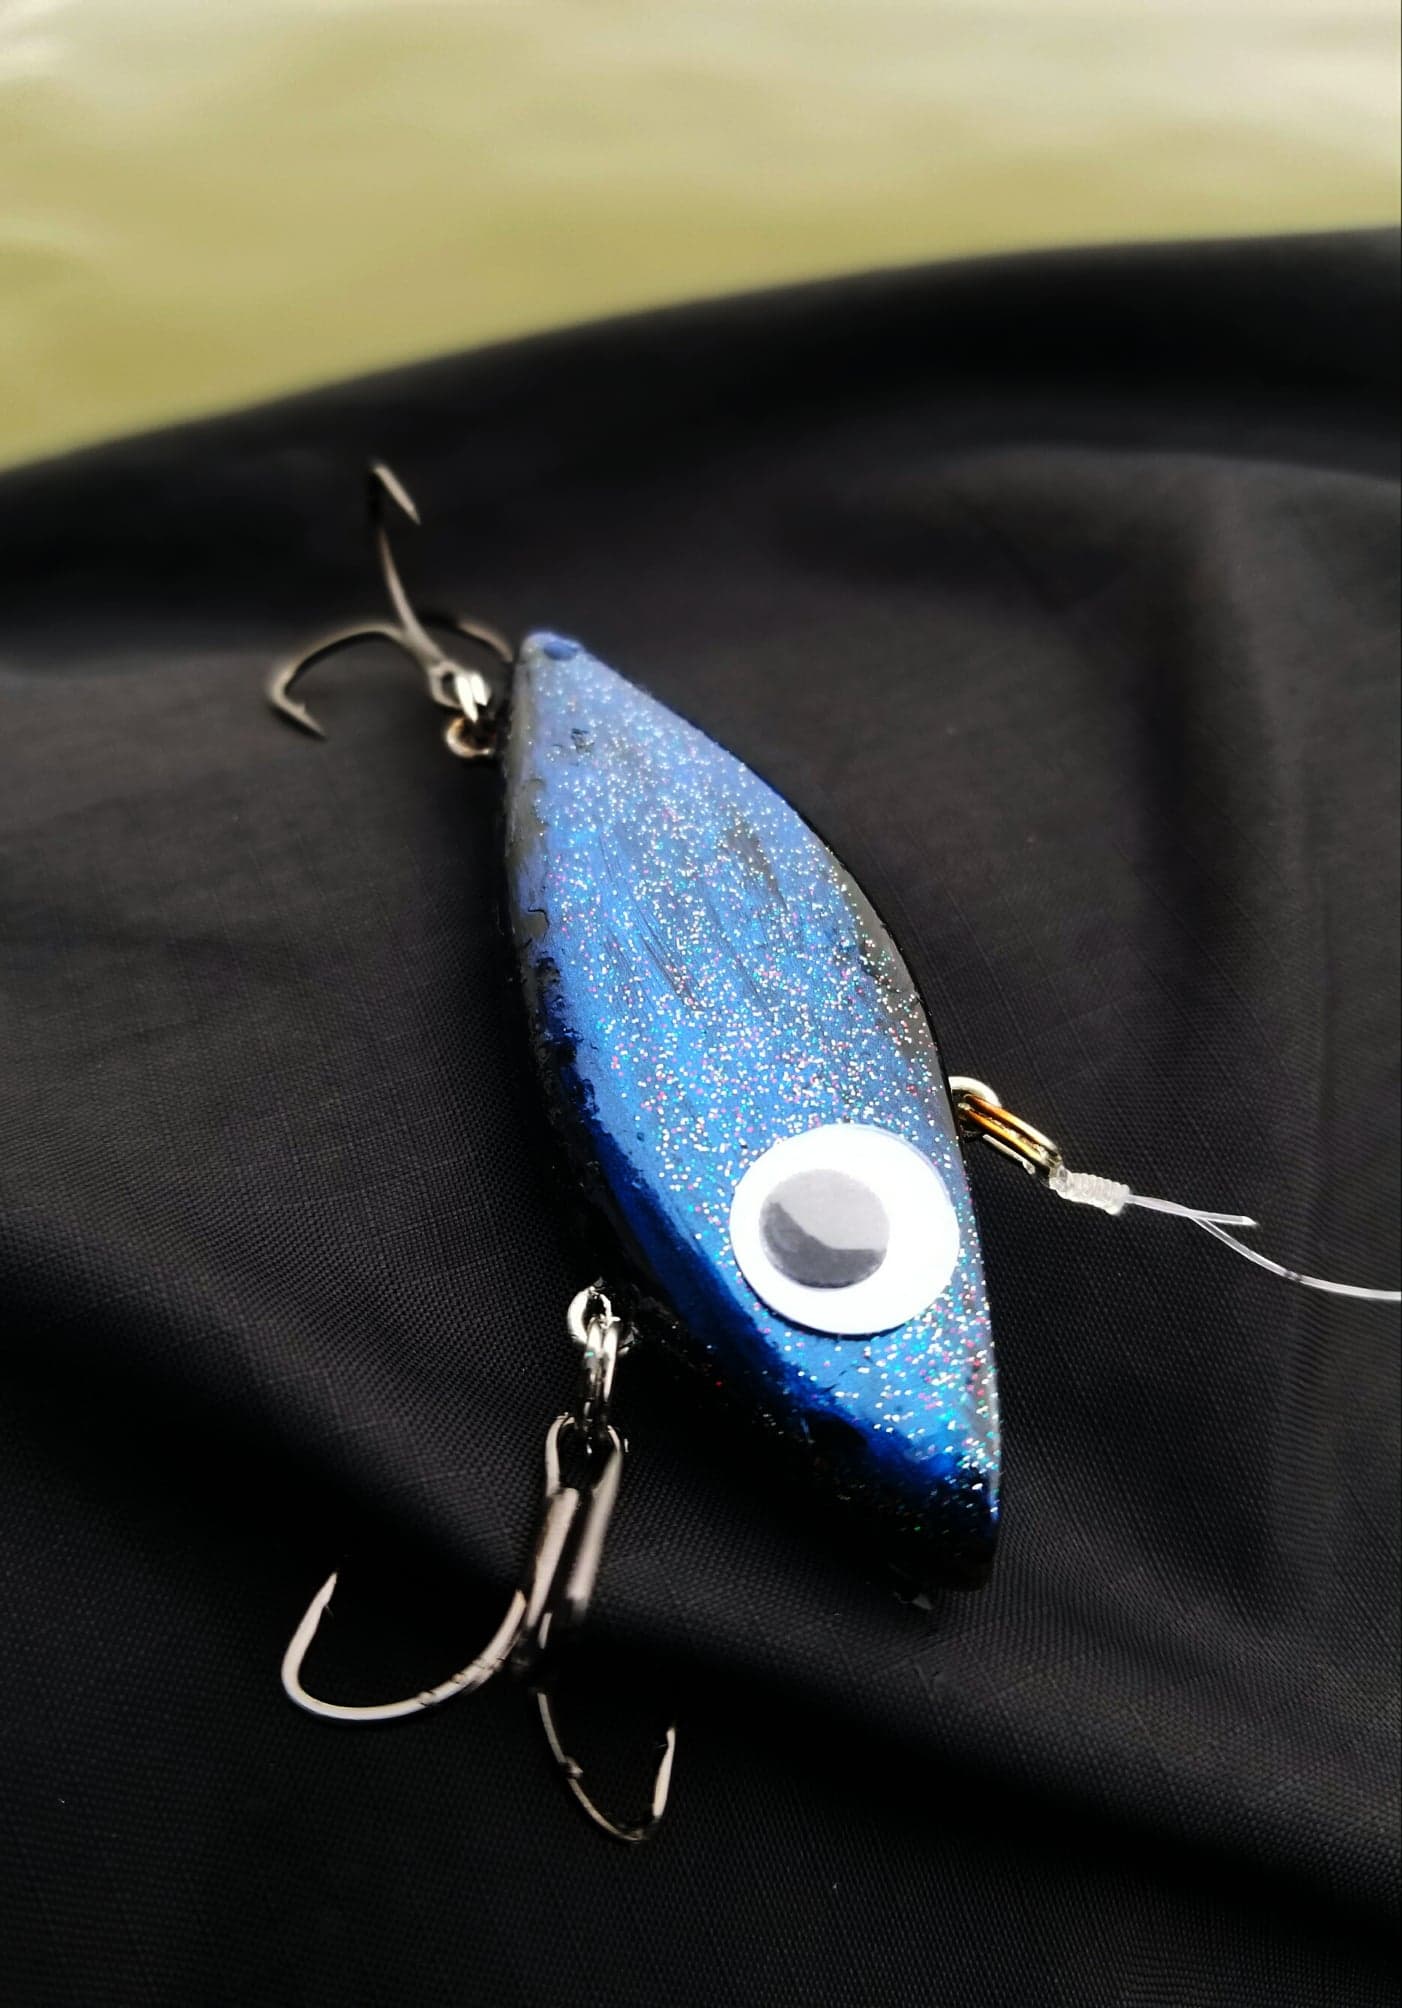 Fully restored Rattle Trap lure